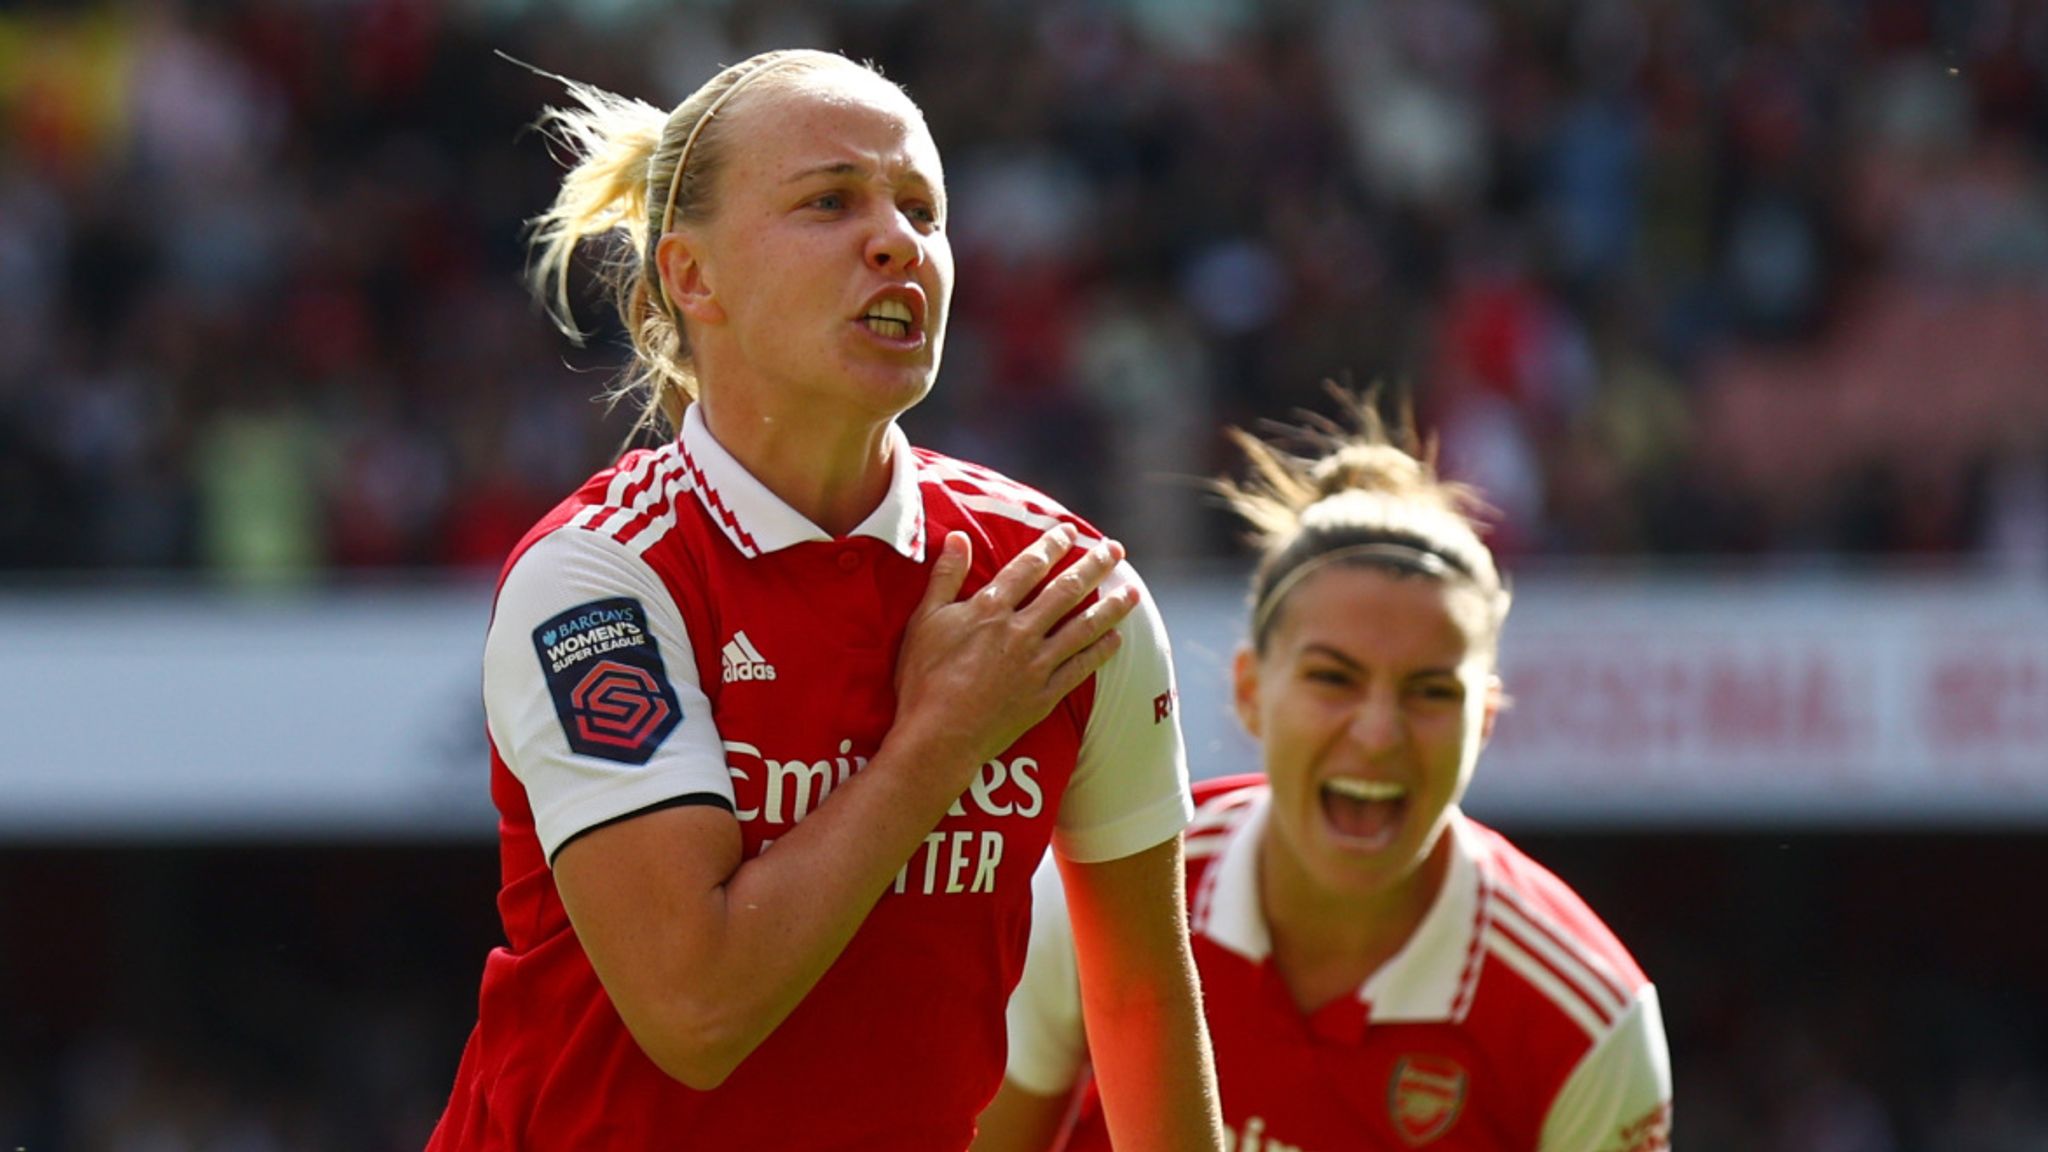 Arsenal FC 4-0 Tottenham LIVE: Women's FA Cup result, latest news and  reaction after Evans hat-trick, London Evening Standard